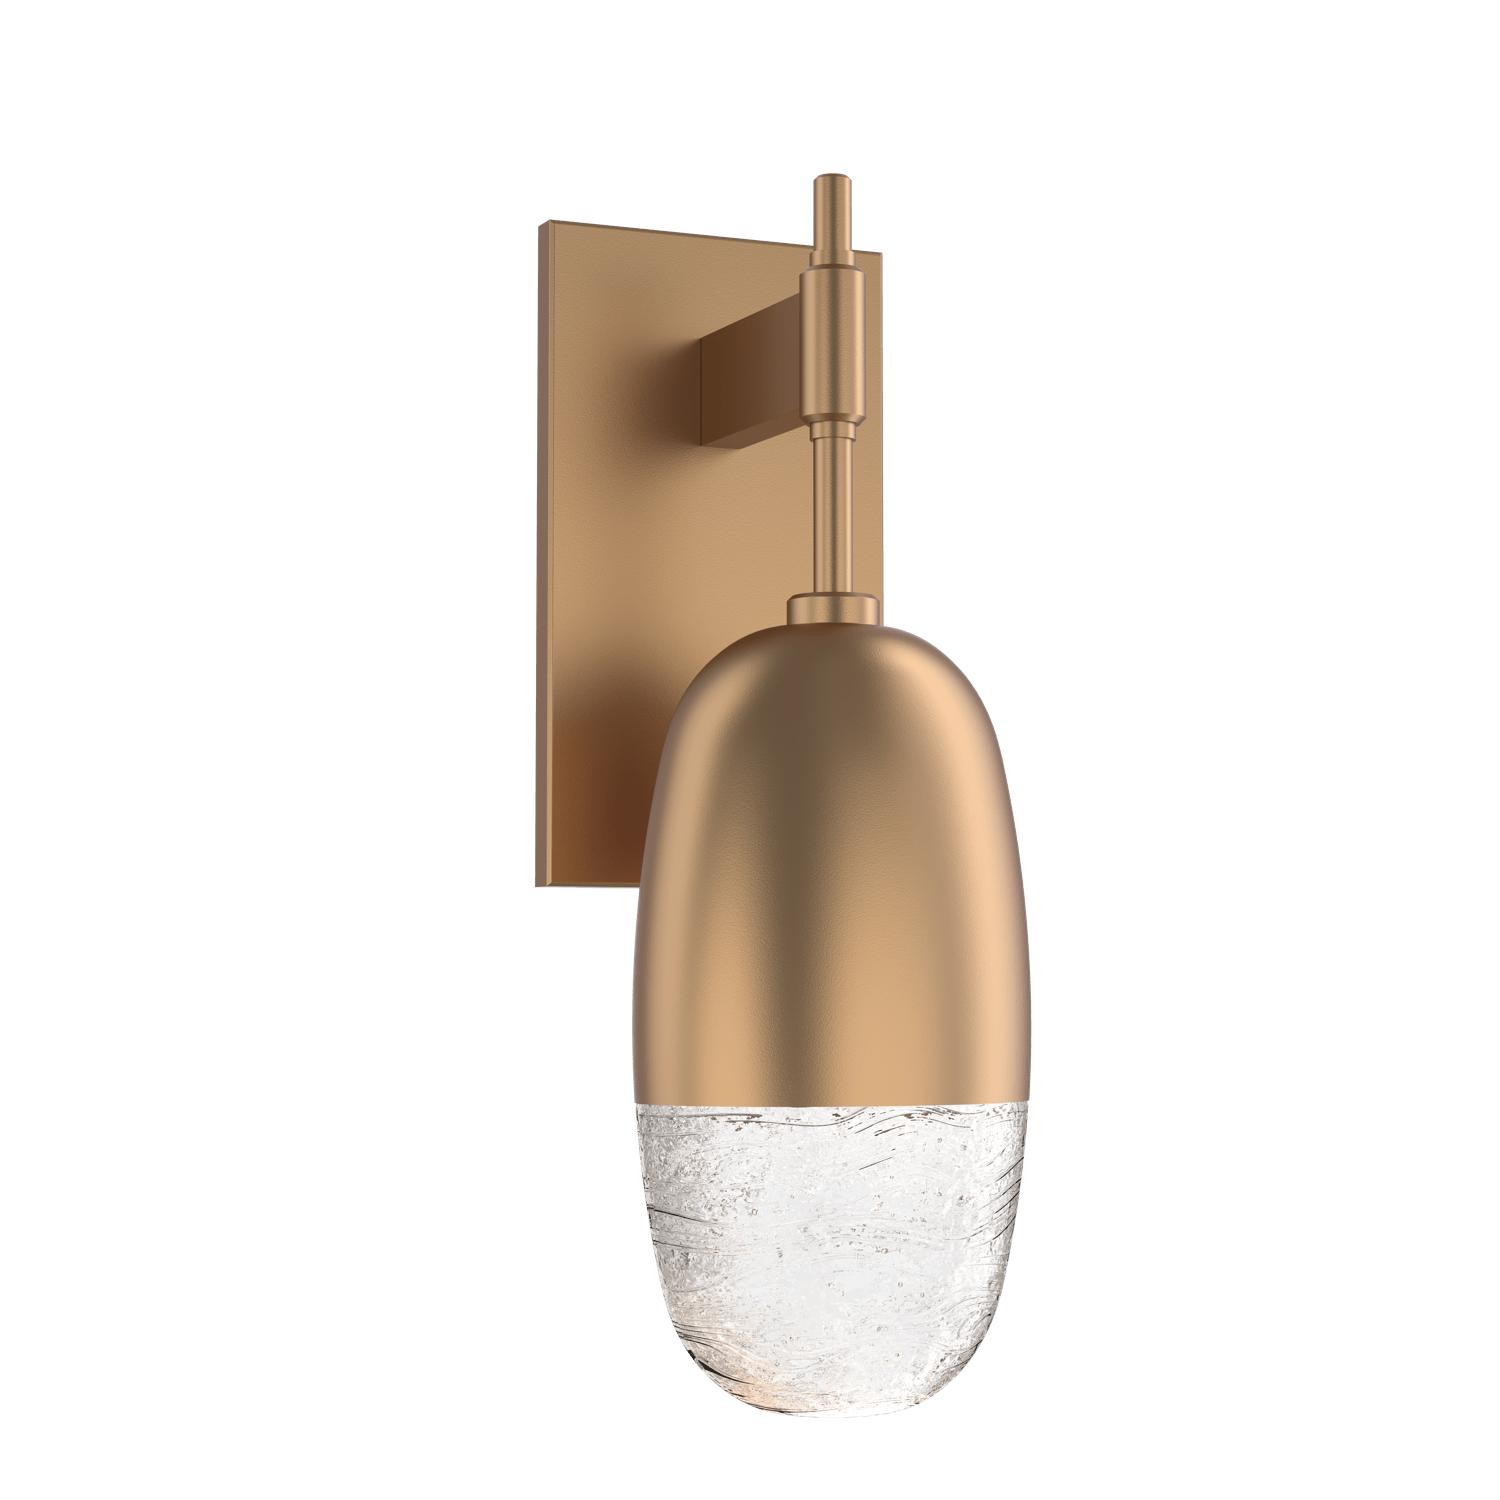 IDB0079-01-NB-Hammerton-Studio-Pebble-wall-sconce-with-novel-brass-finish-and-clear-cast-glass-shades-and-LED-lamping